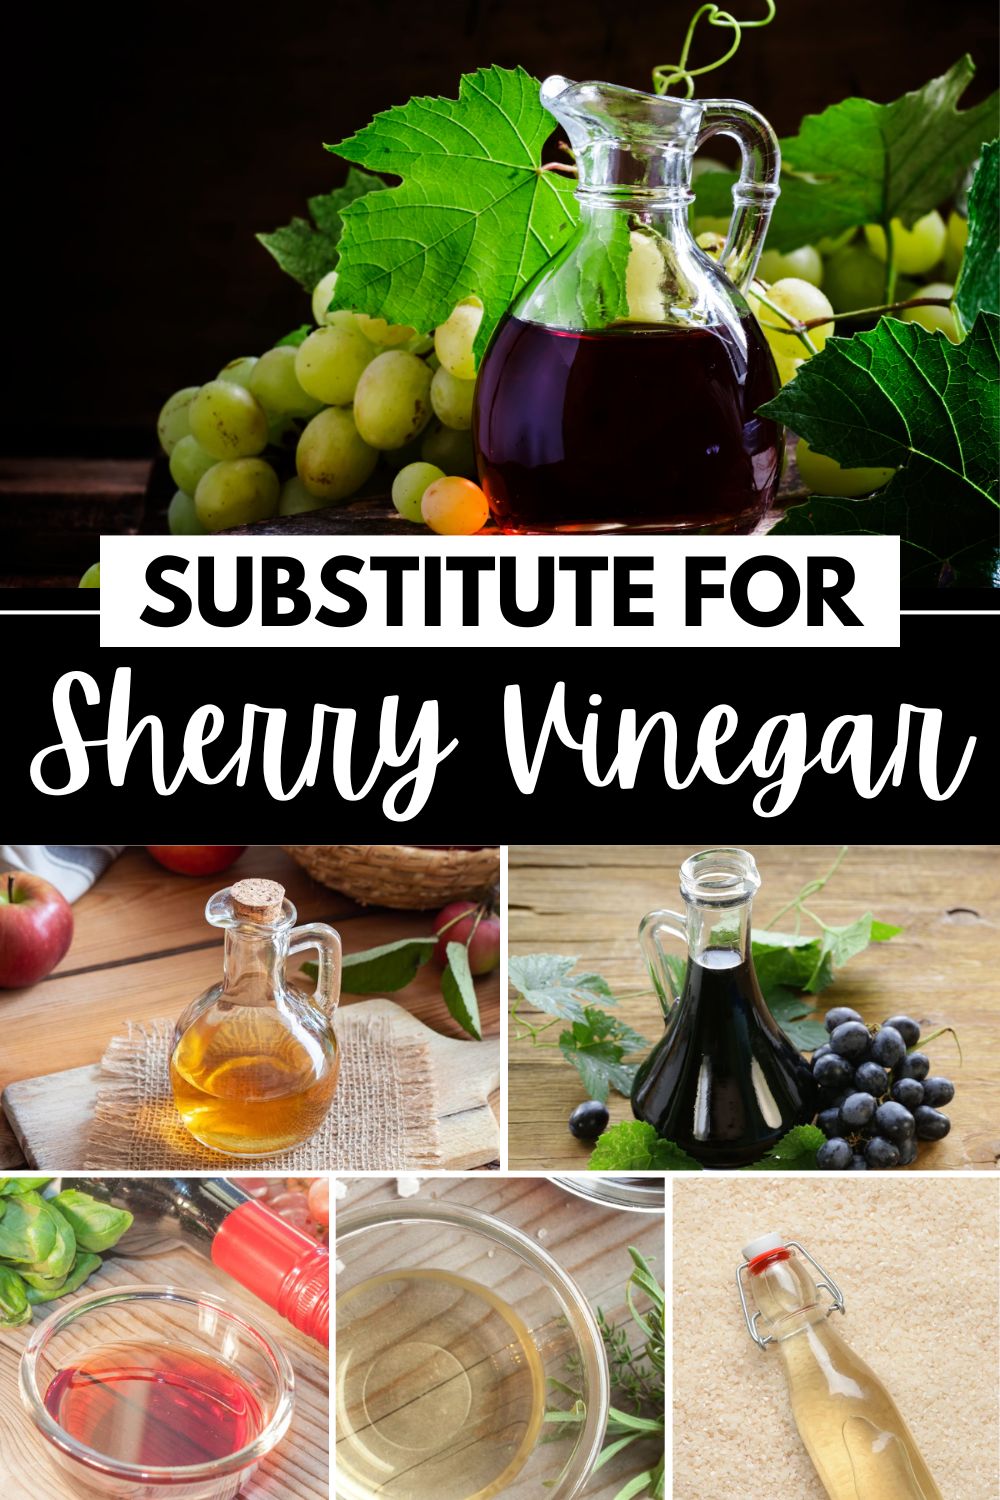 A collage of images showcasing a substitute for sherry vinegar.